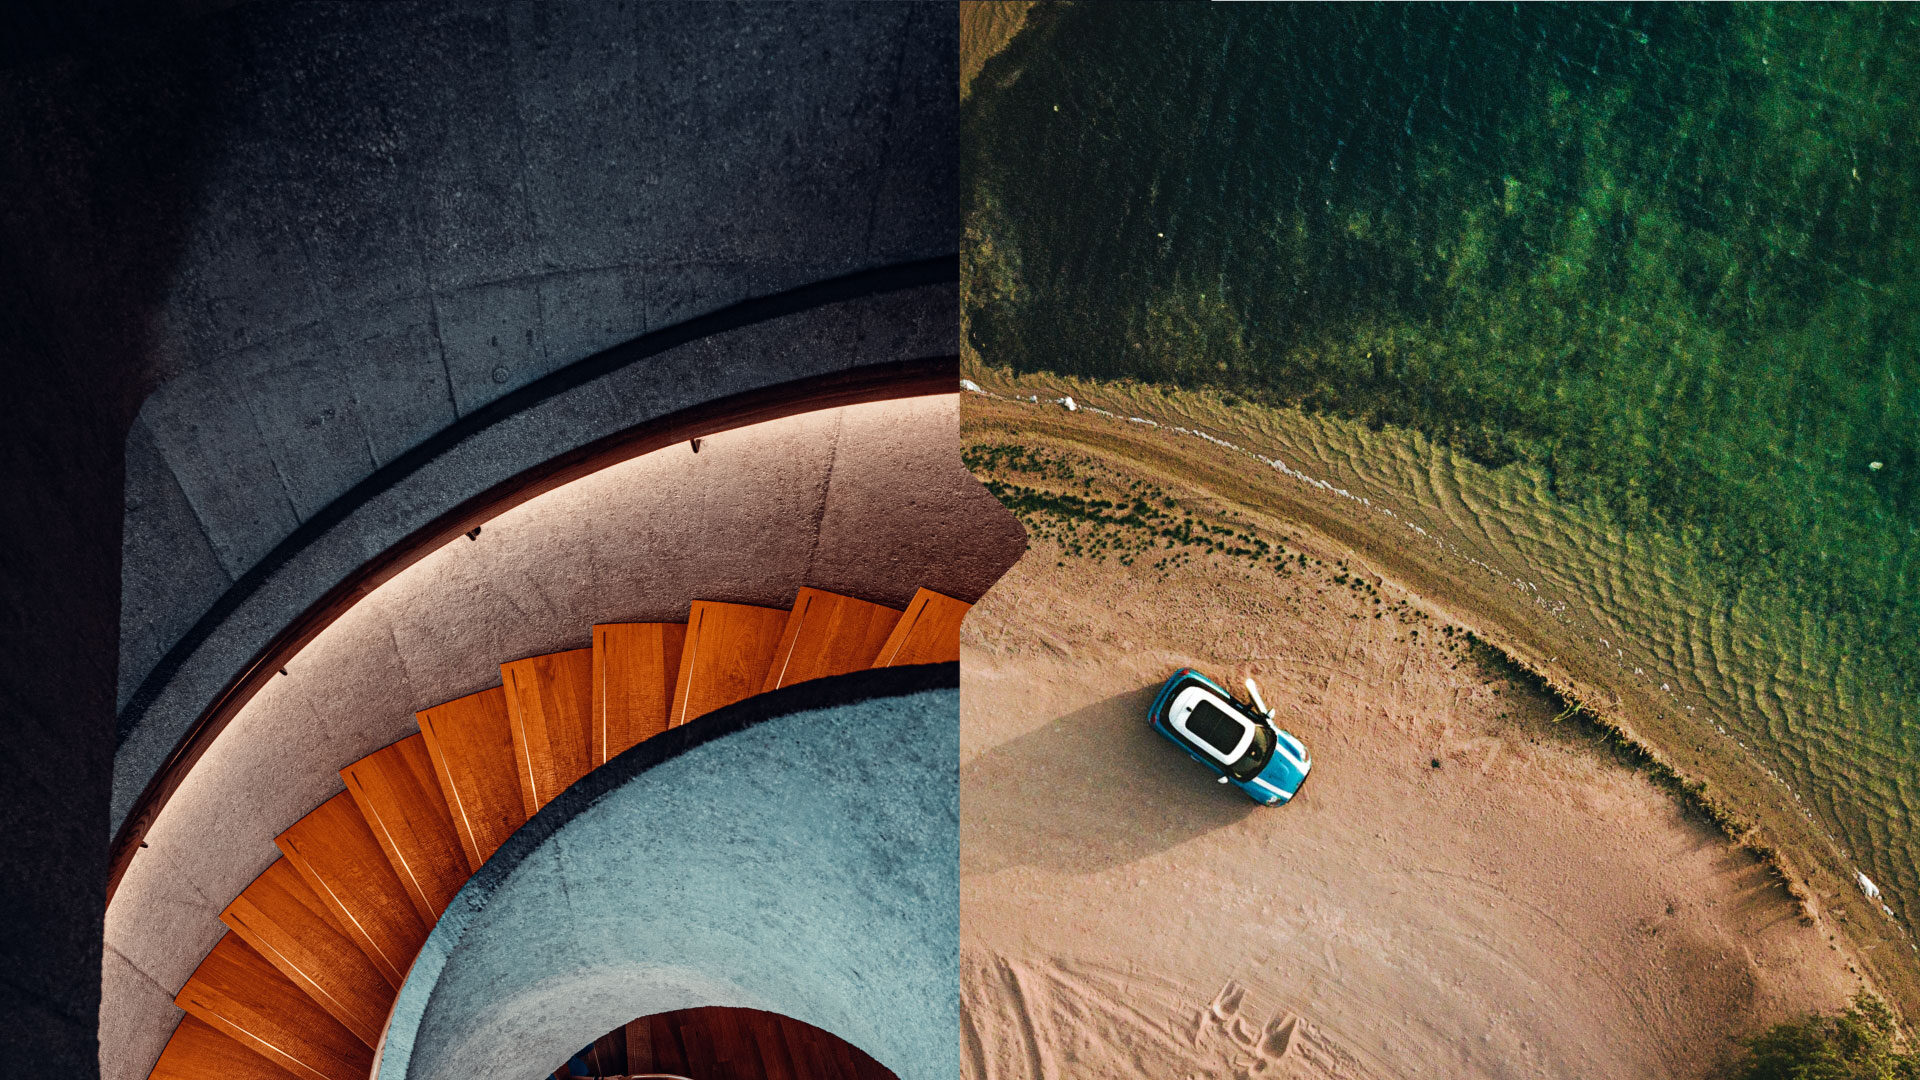 Stairs and aerial view of the car next to the lake